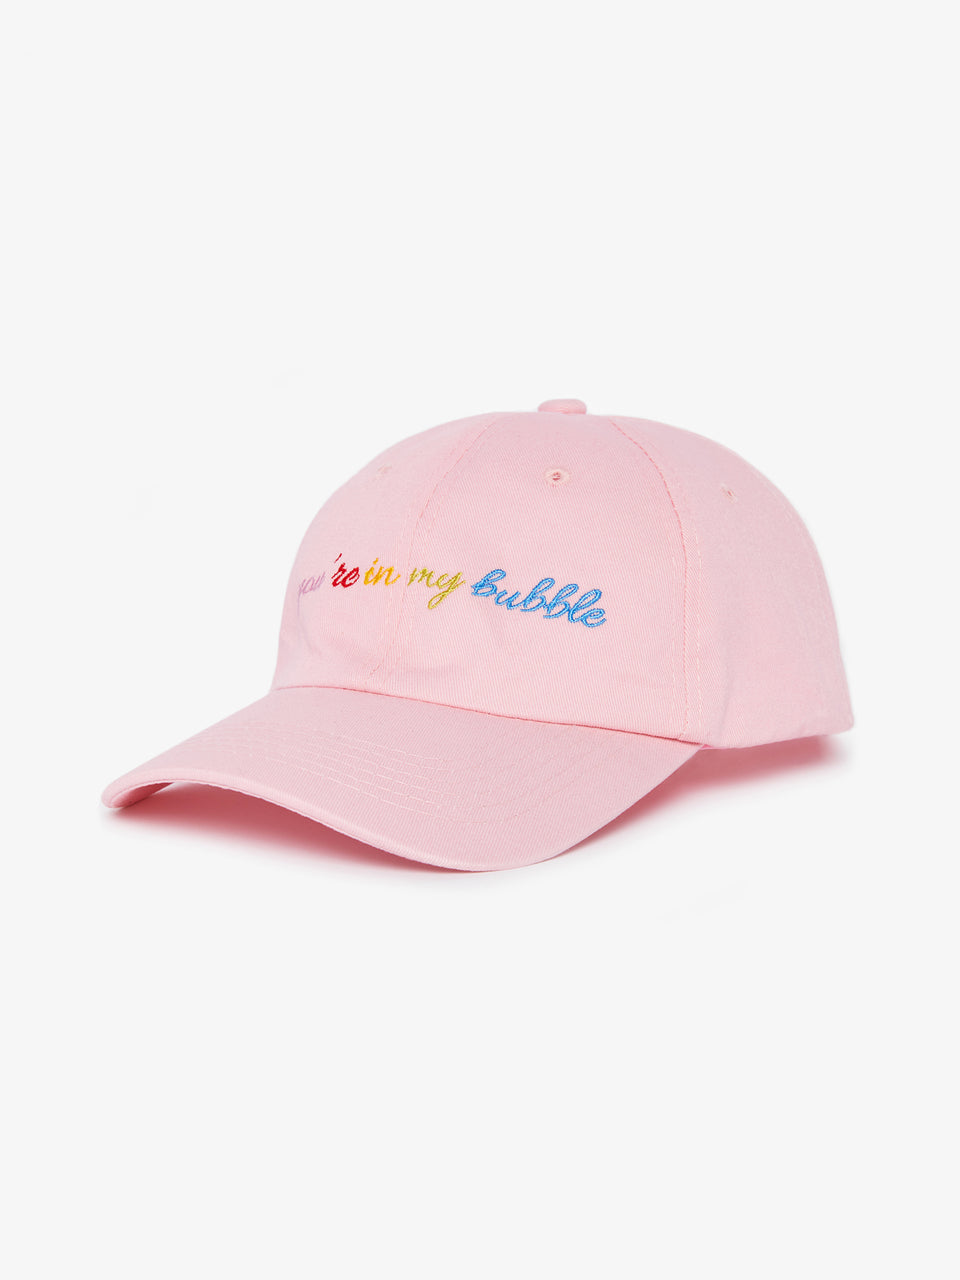 True Img_You're In My Bubble Hat_Pink